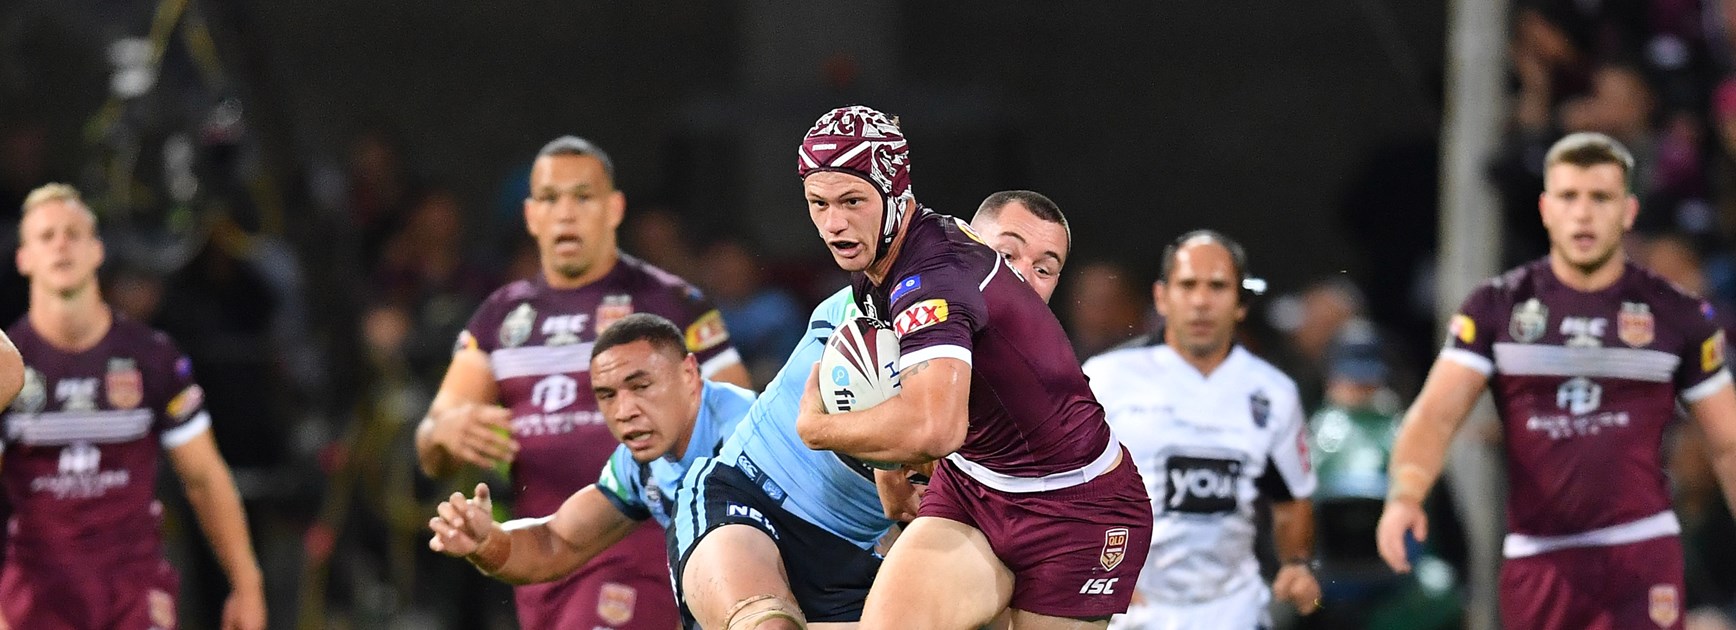 Knights duo shine with epic Origin performances